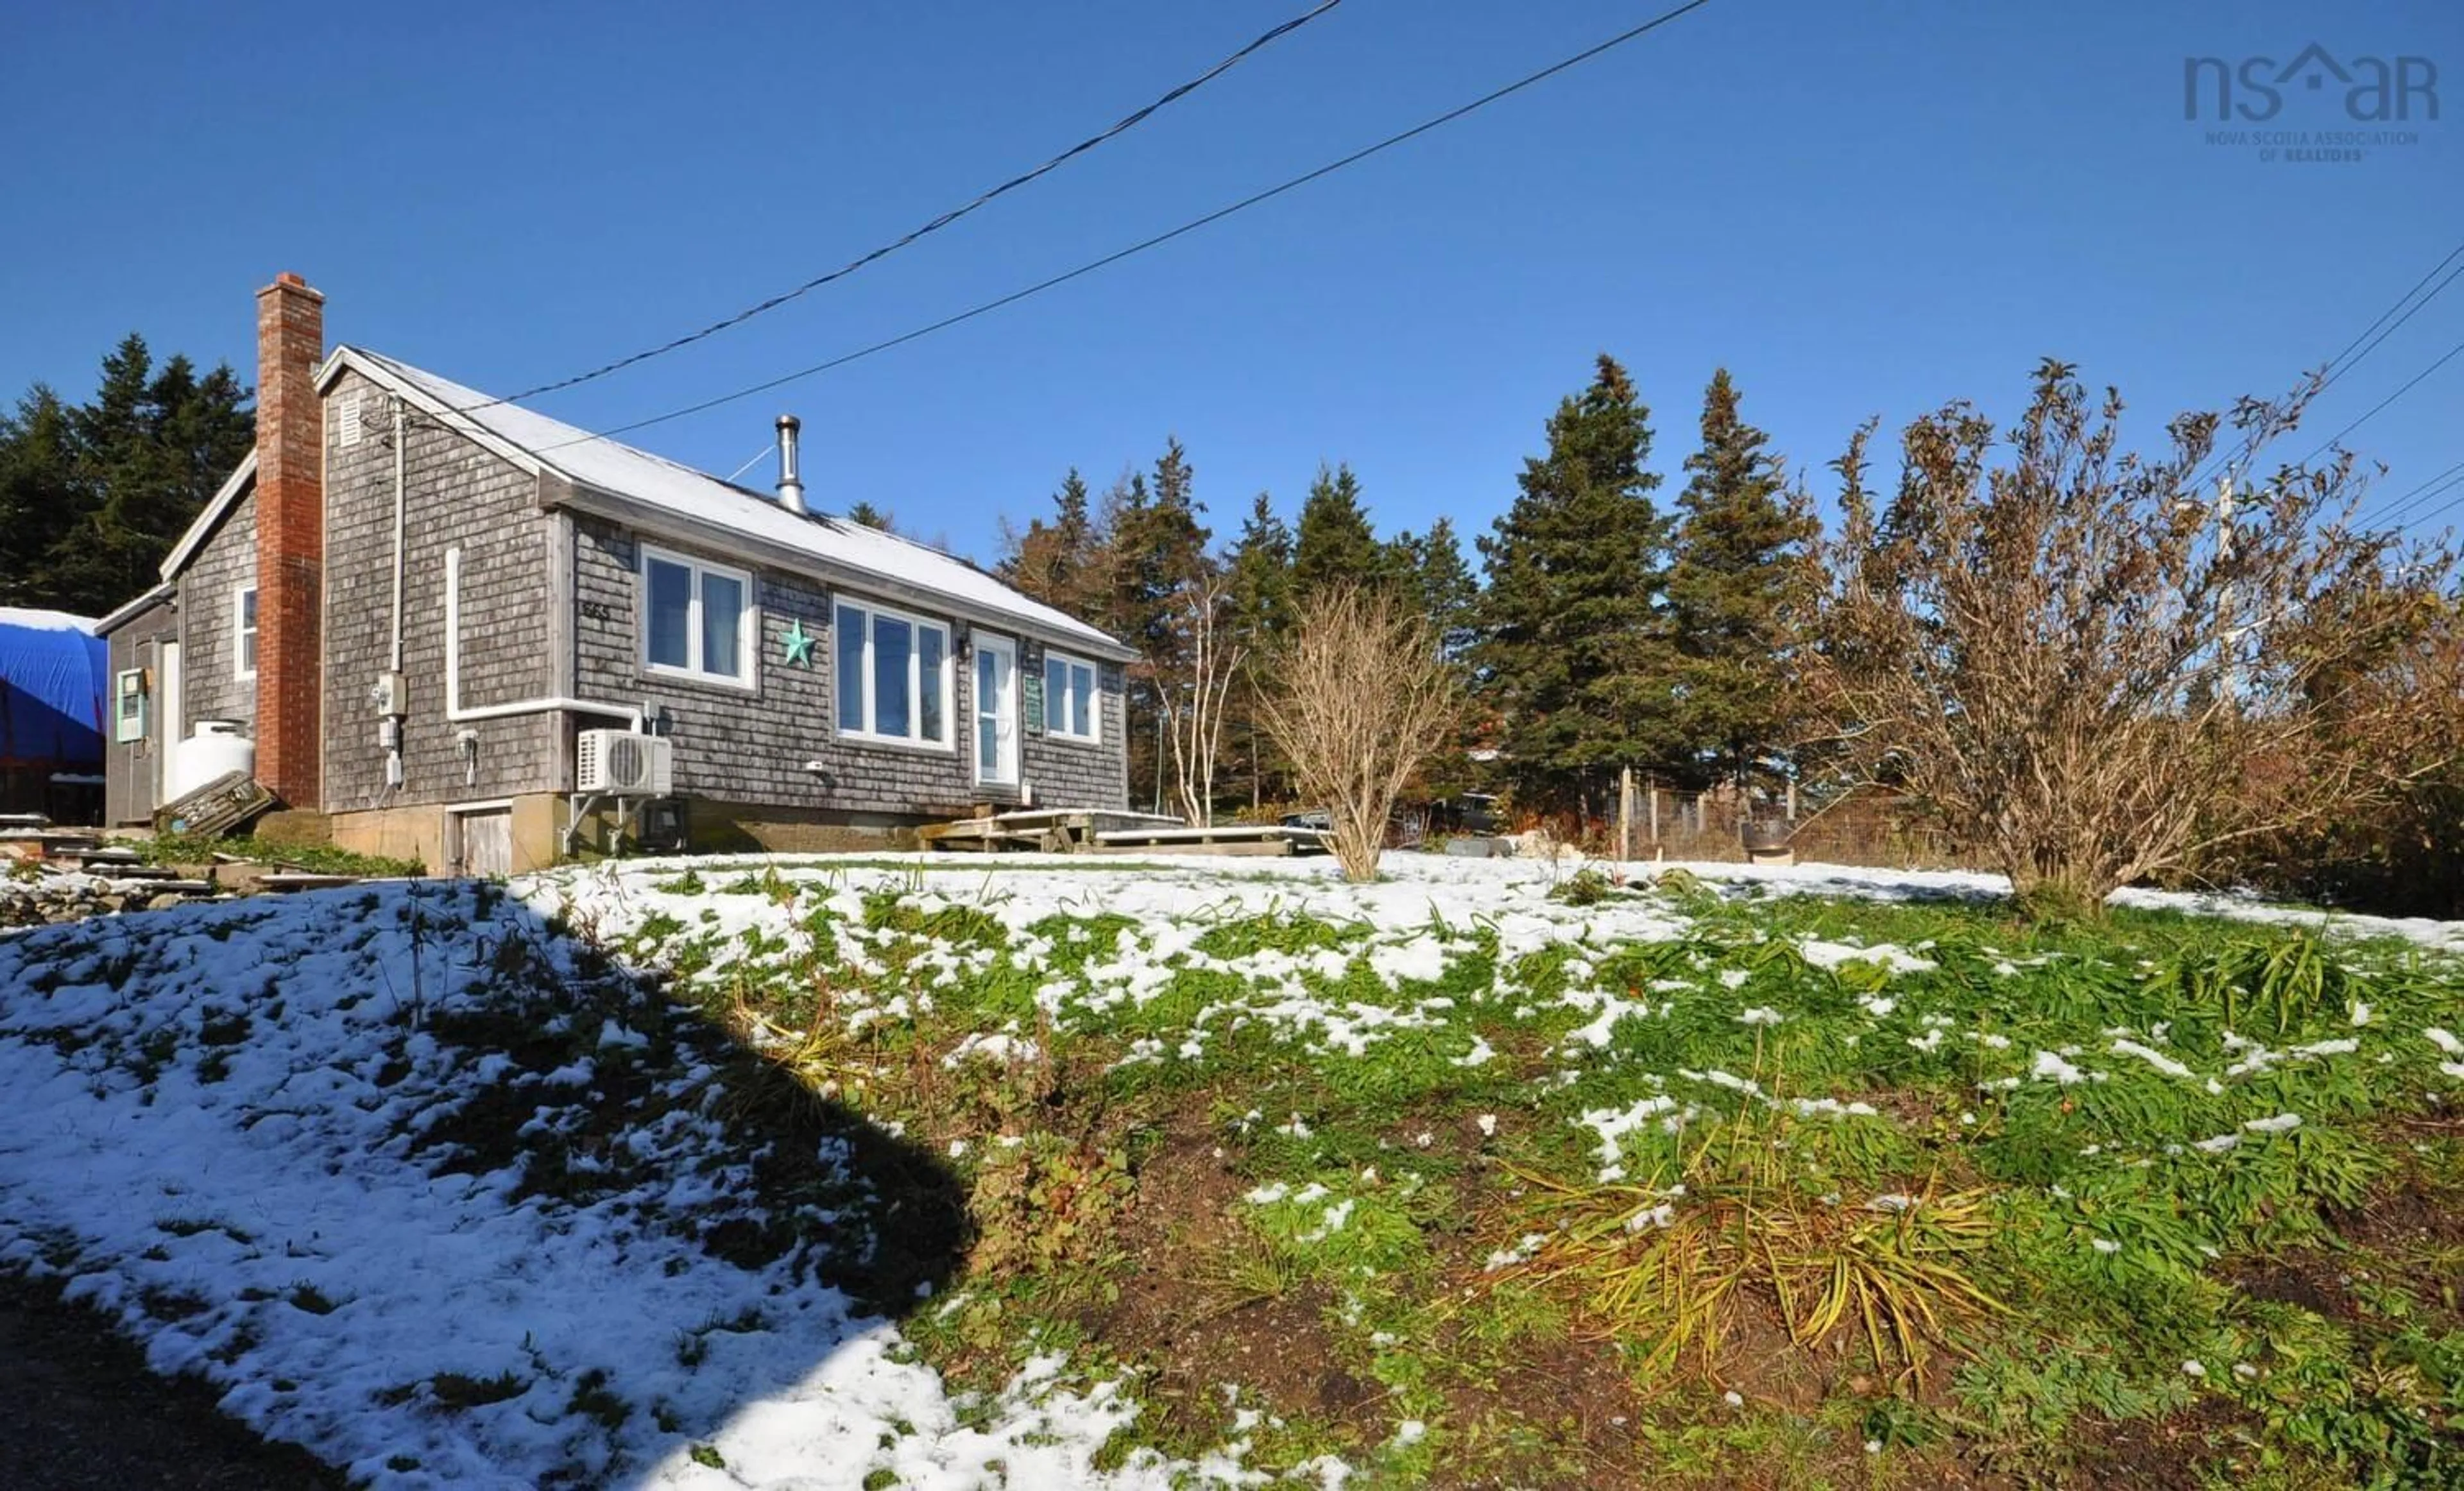 Home with unknown exterior material for 665 Ketch Harbour Rd, Portuguese Cove Nova Scotia B3V 1K2